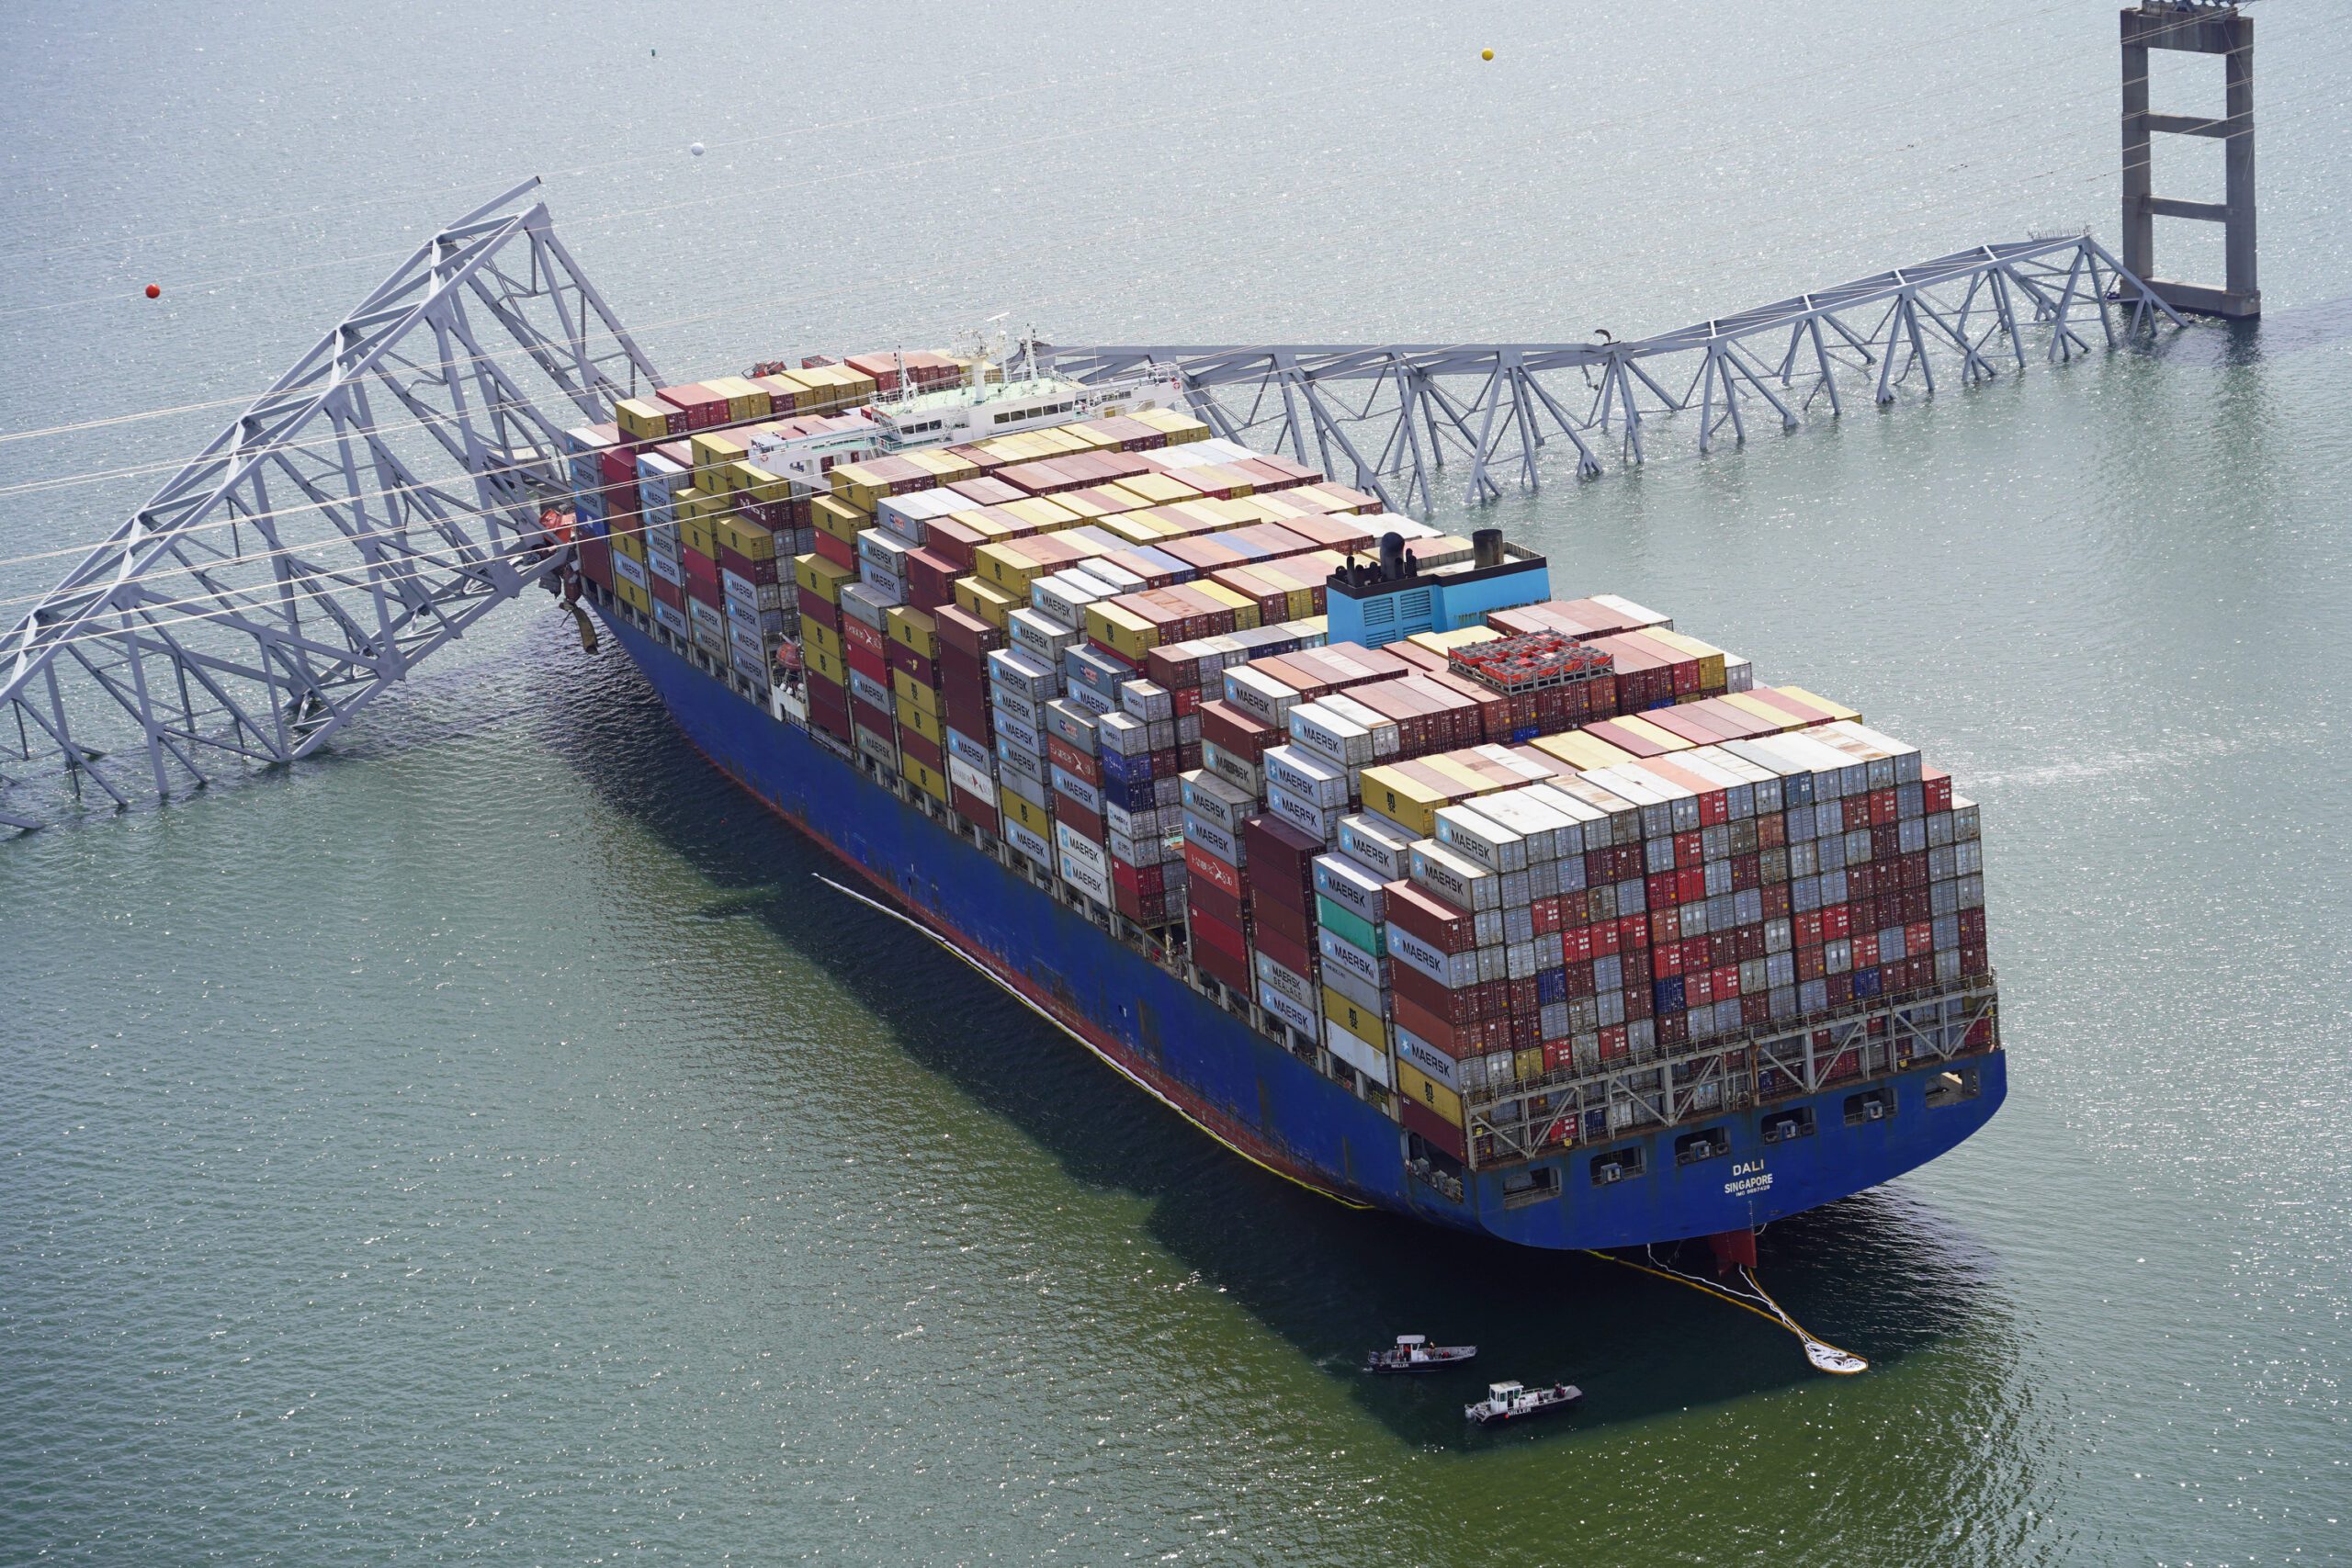 Stern view of containership Dali entangled in the baltimore bridge